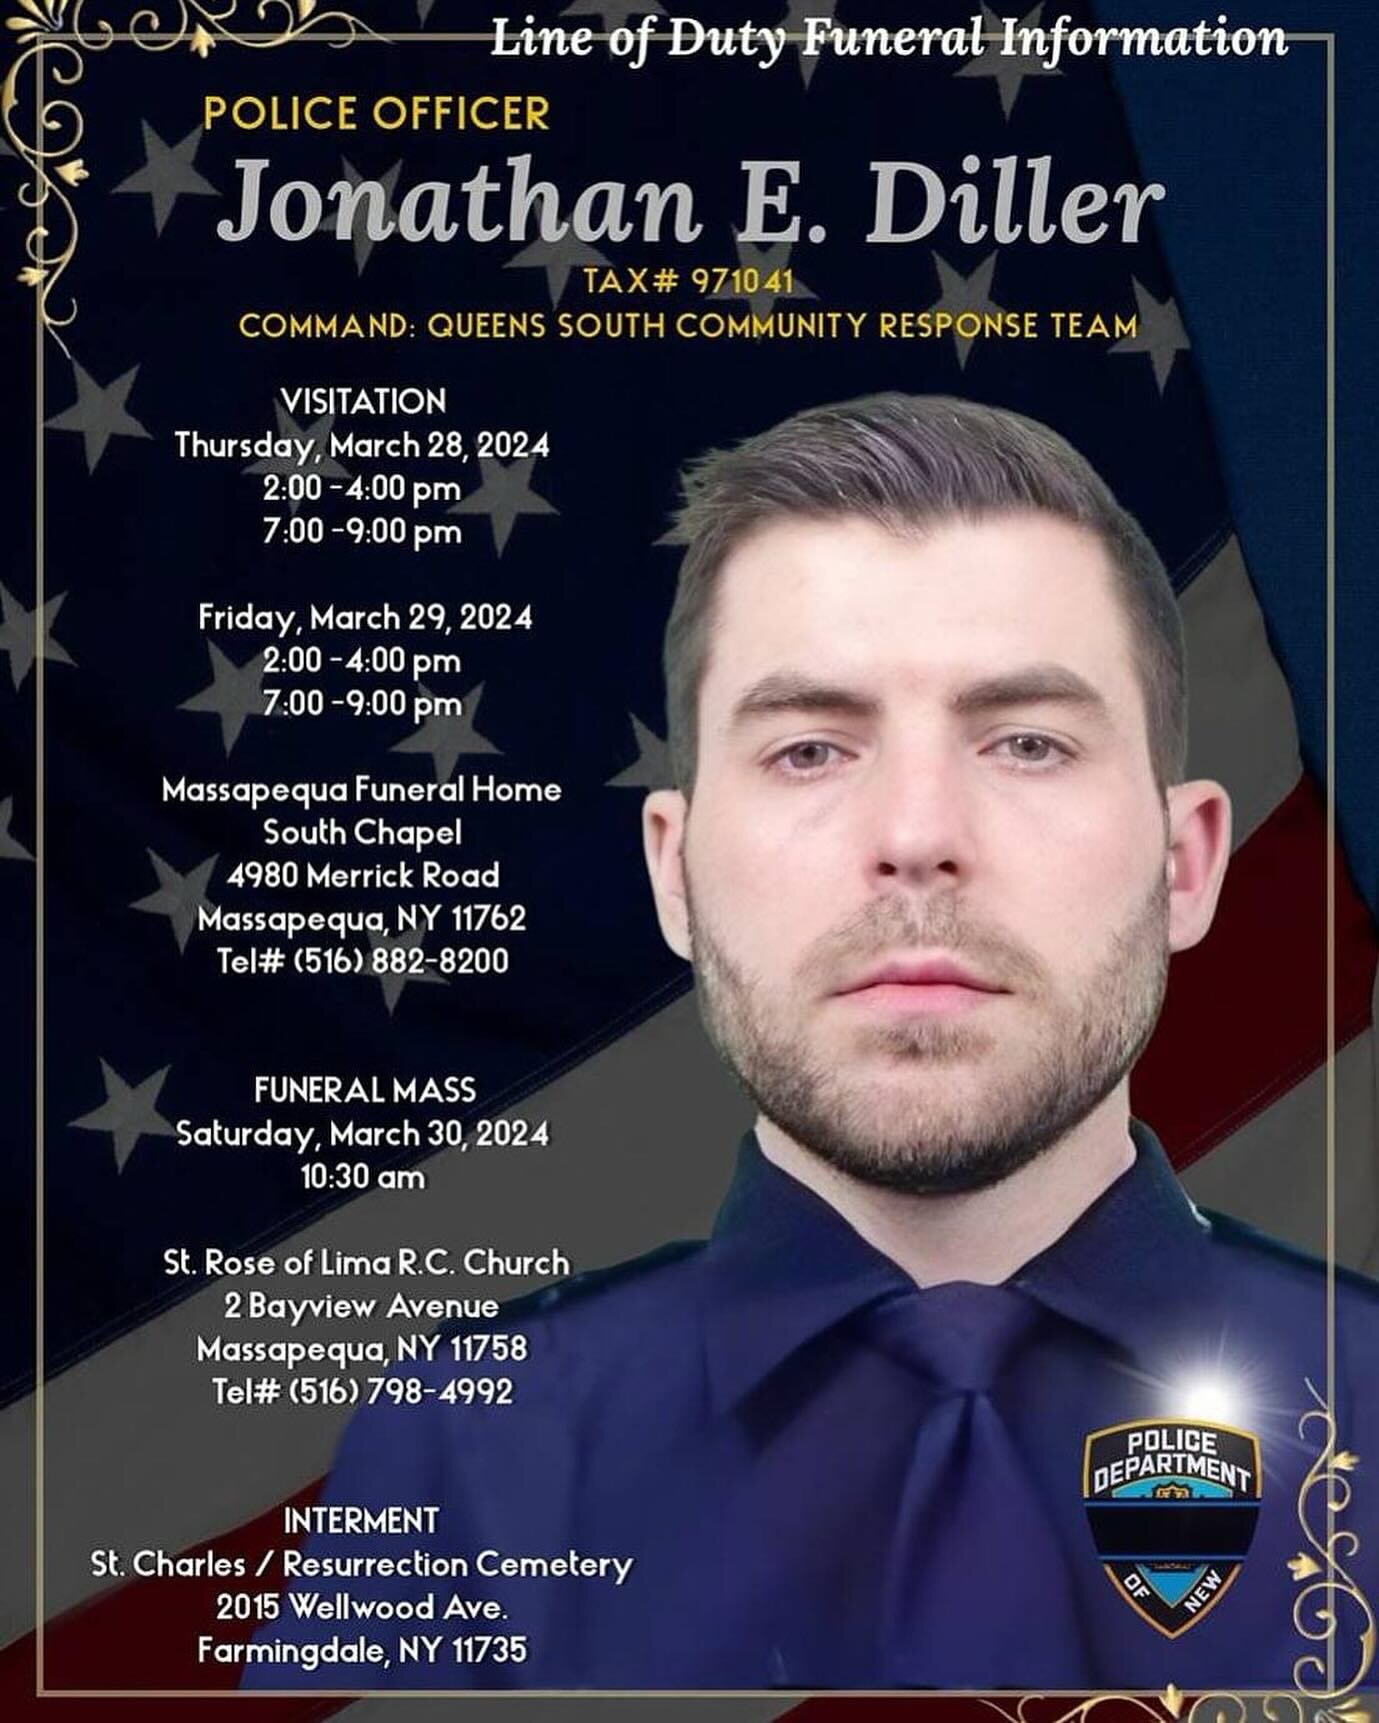 Funeral arrangements for our hero Police Officer Jonathan Diller who was killed in the line of duty on 3/25/2024. Please keep his family in your prayers!